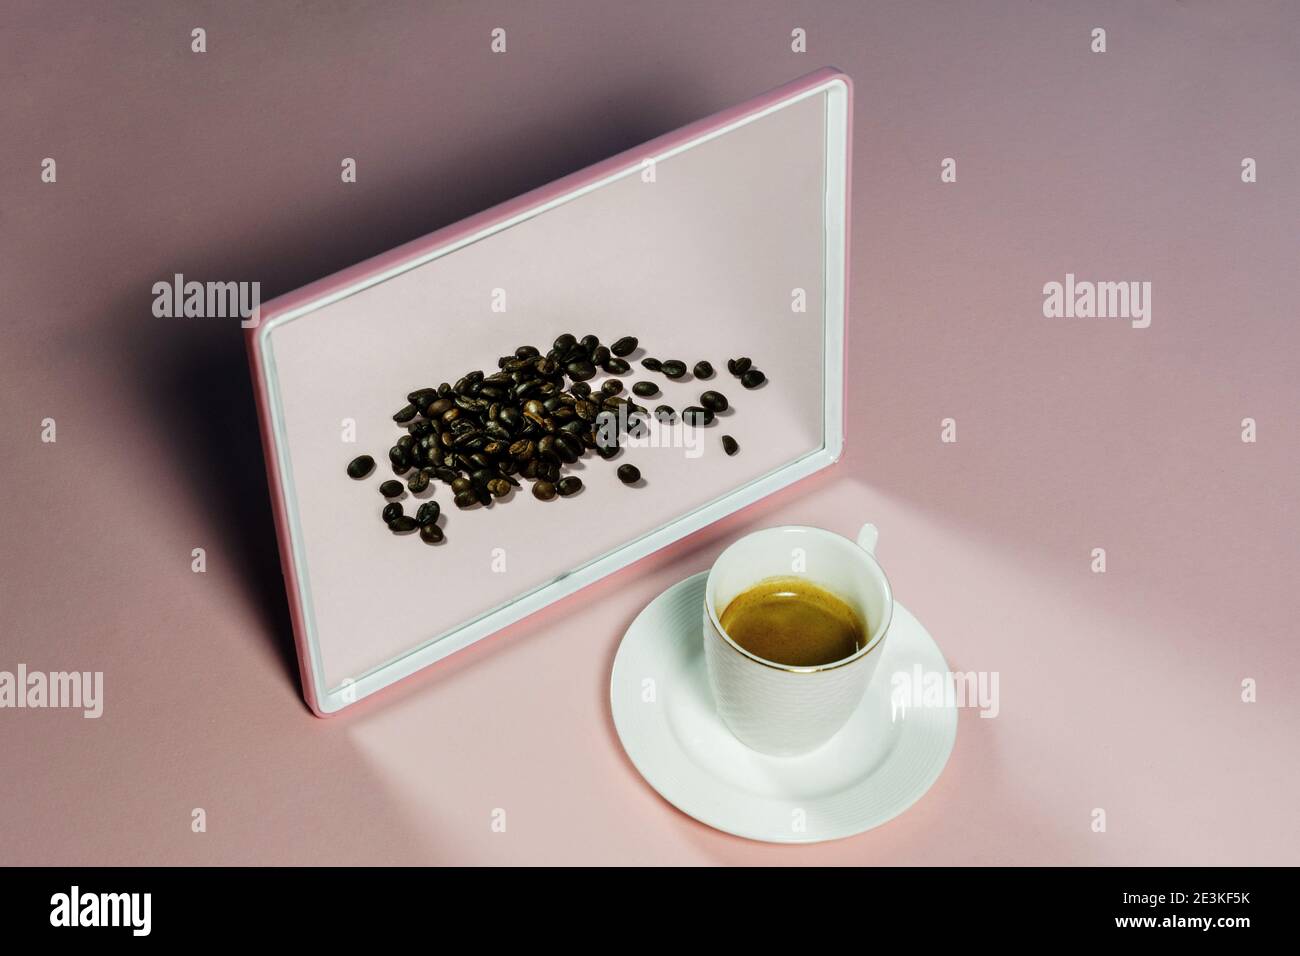 Espresso coffee in a mirror with coffee beans in reflection. Creative coffee concept Stock Photo